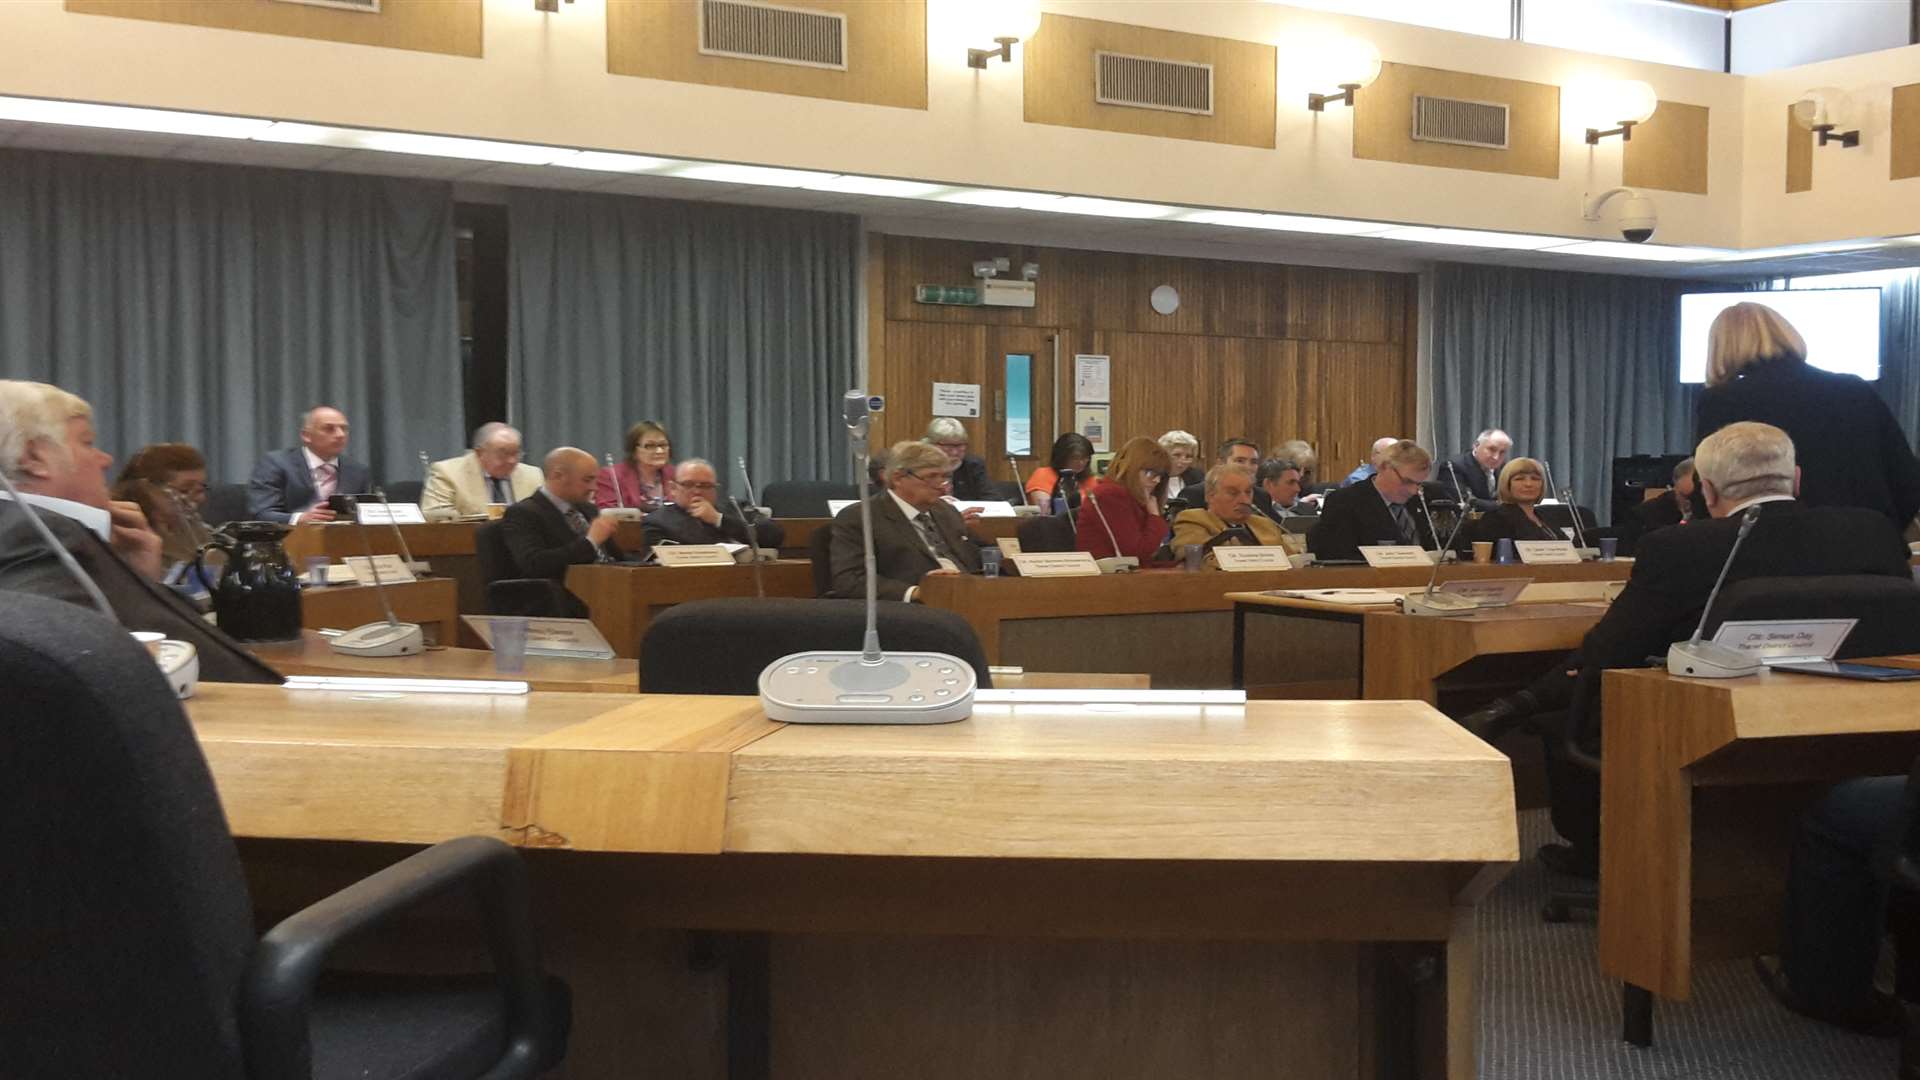 Memebrs of Thanet District Council discussing the merger plan tonight